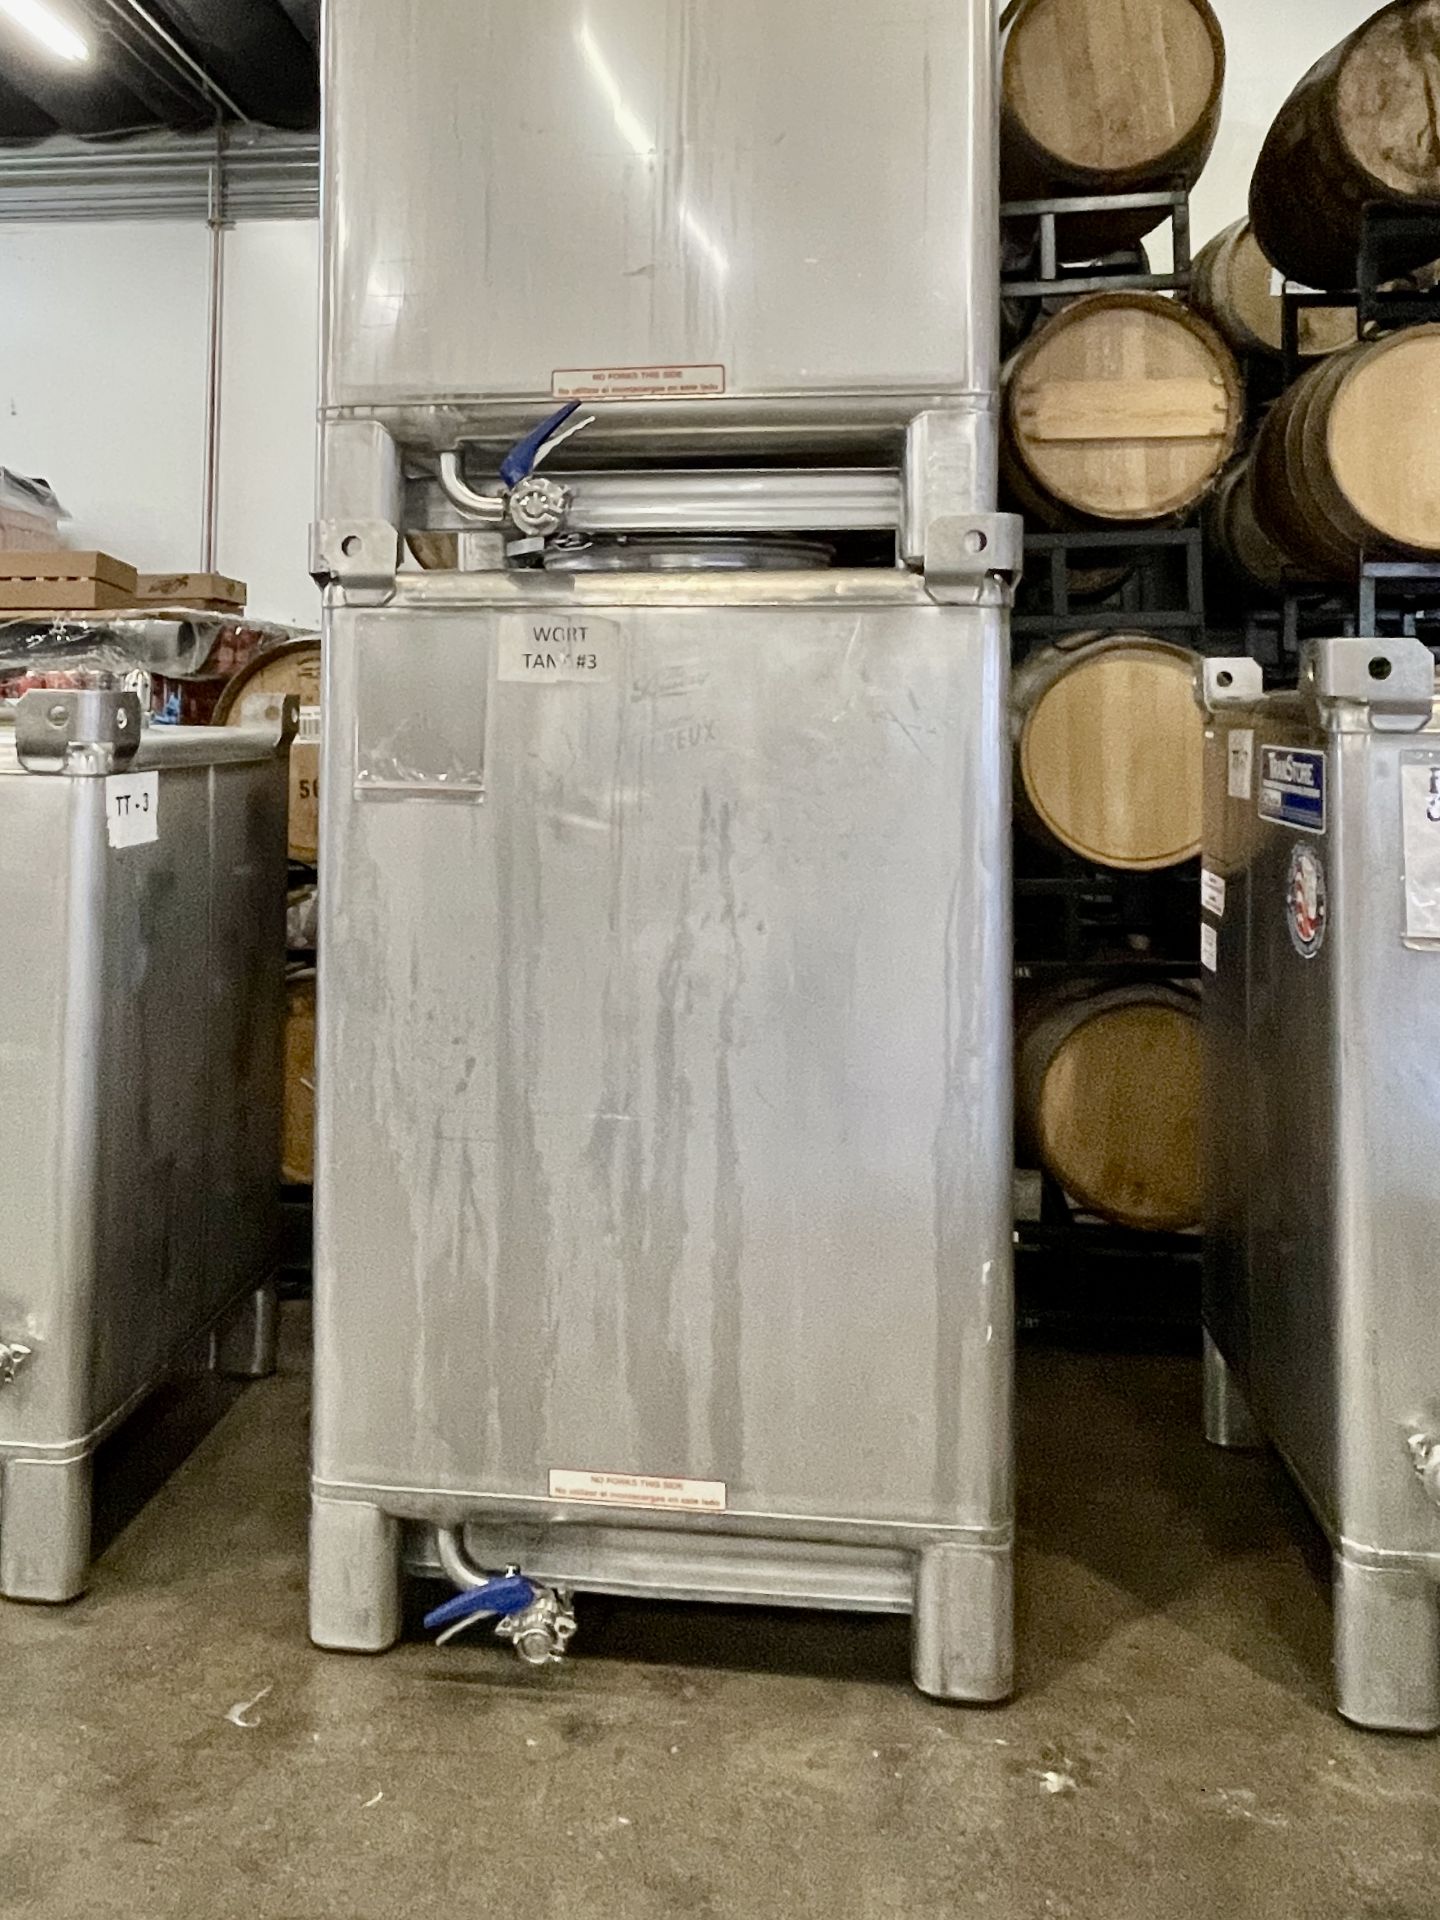 2016 Metalcraft TranStore 550 Gallon Stainless Steel Tote/Tank (Has Dent) (WT 3) | Rig Fee: $185